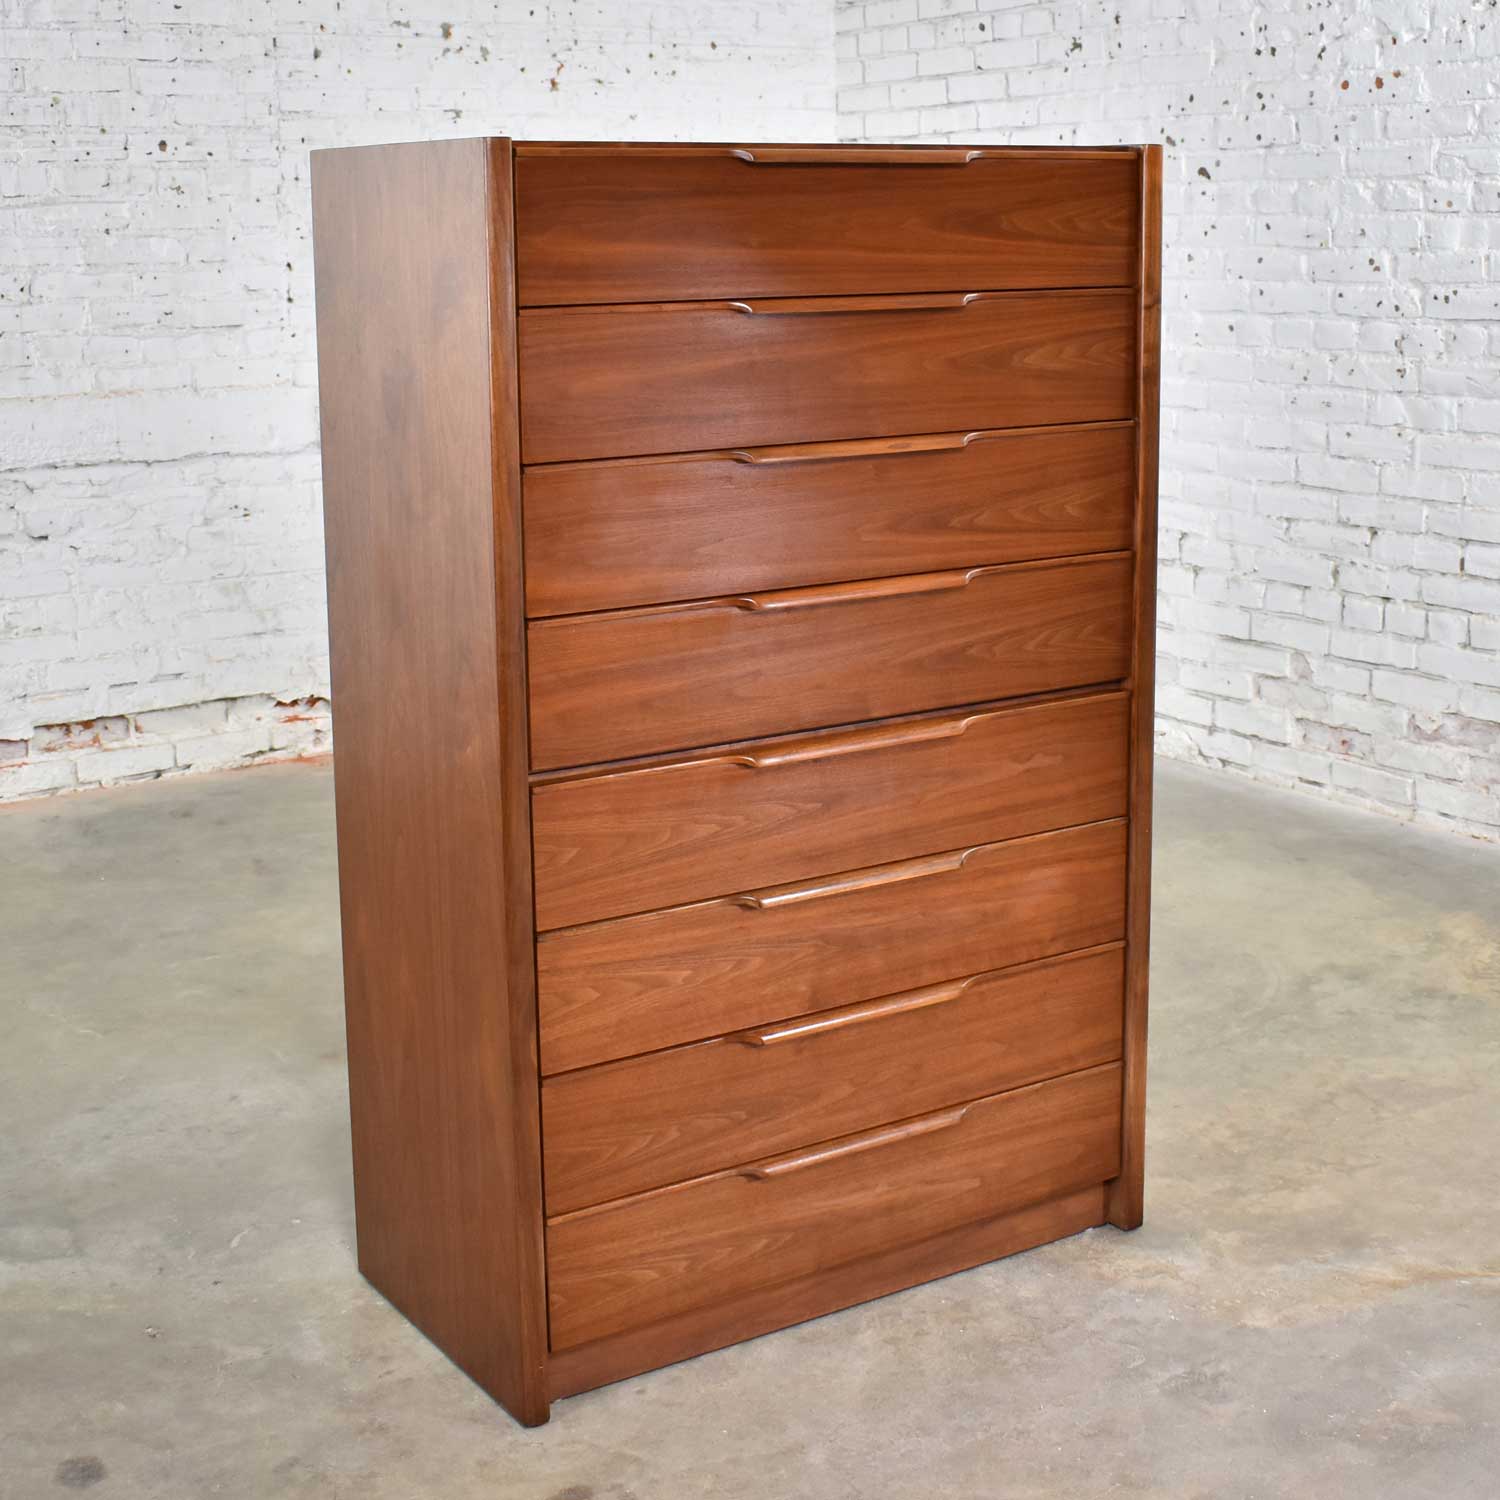 Walnut Scandinavian Modern Style Tall Chest of Drawers by Barzilay Furniture Mfg.